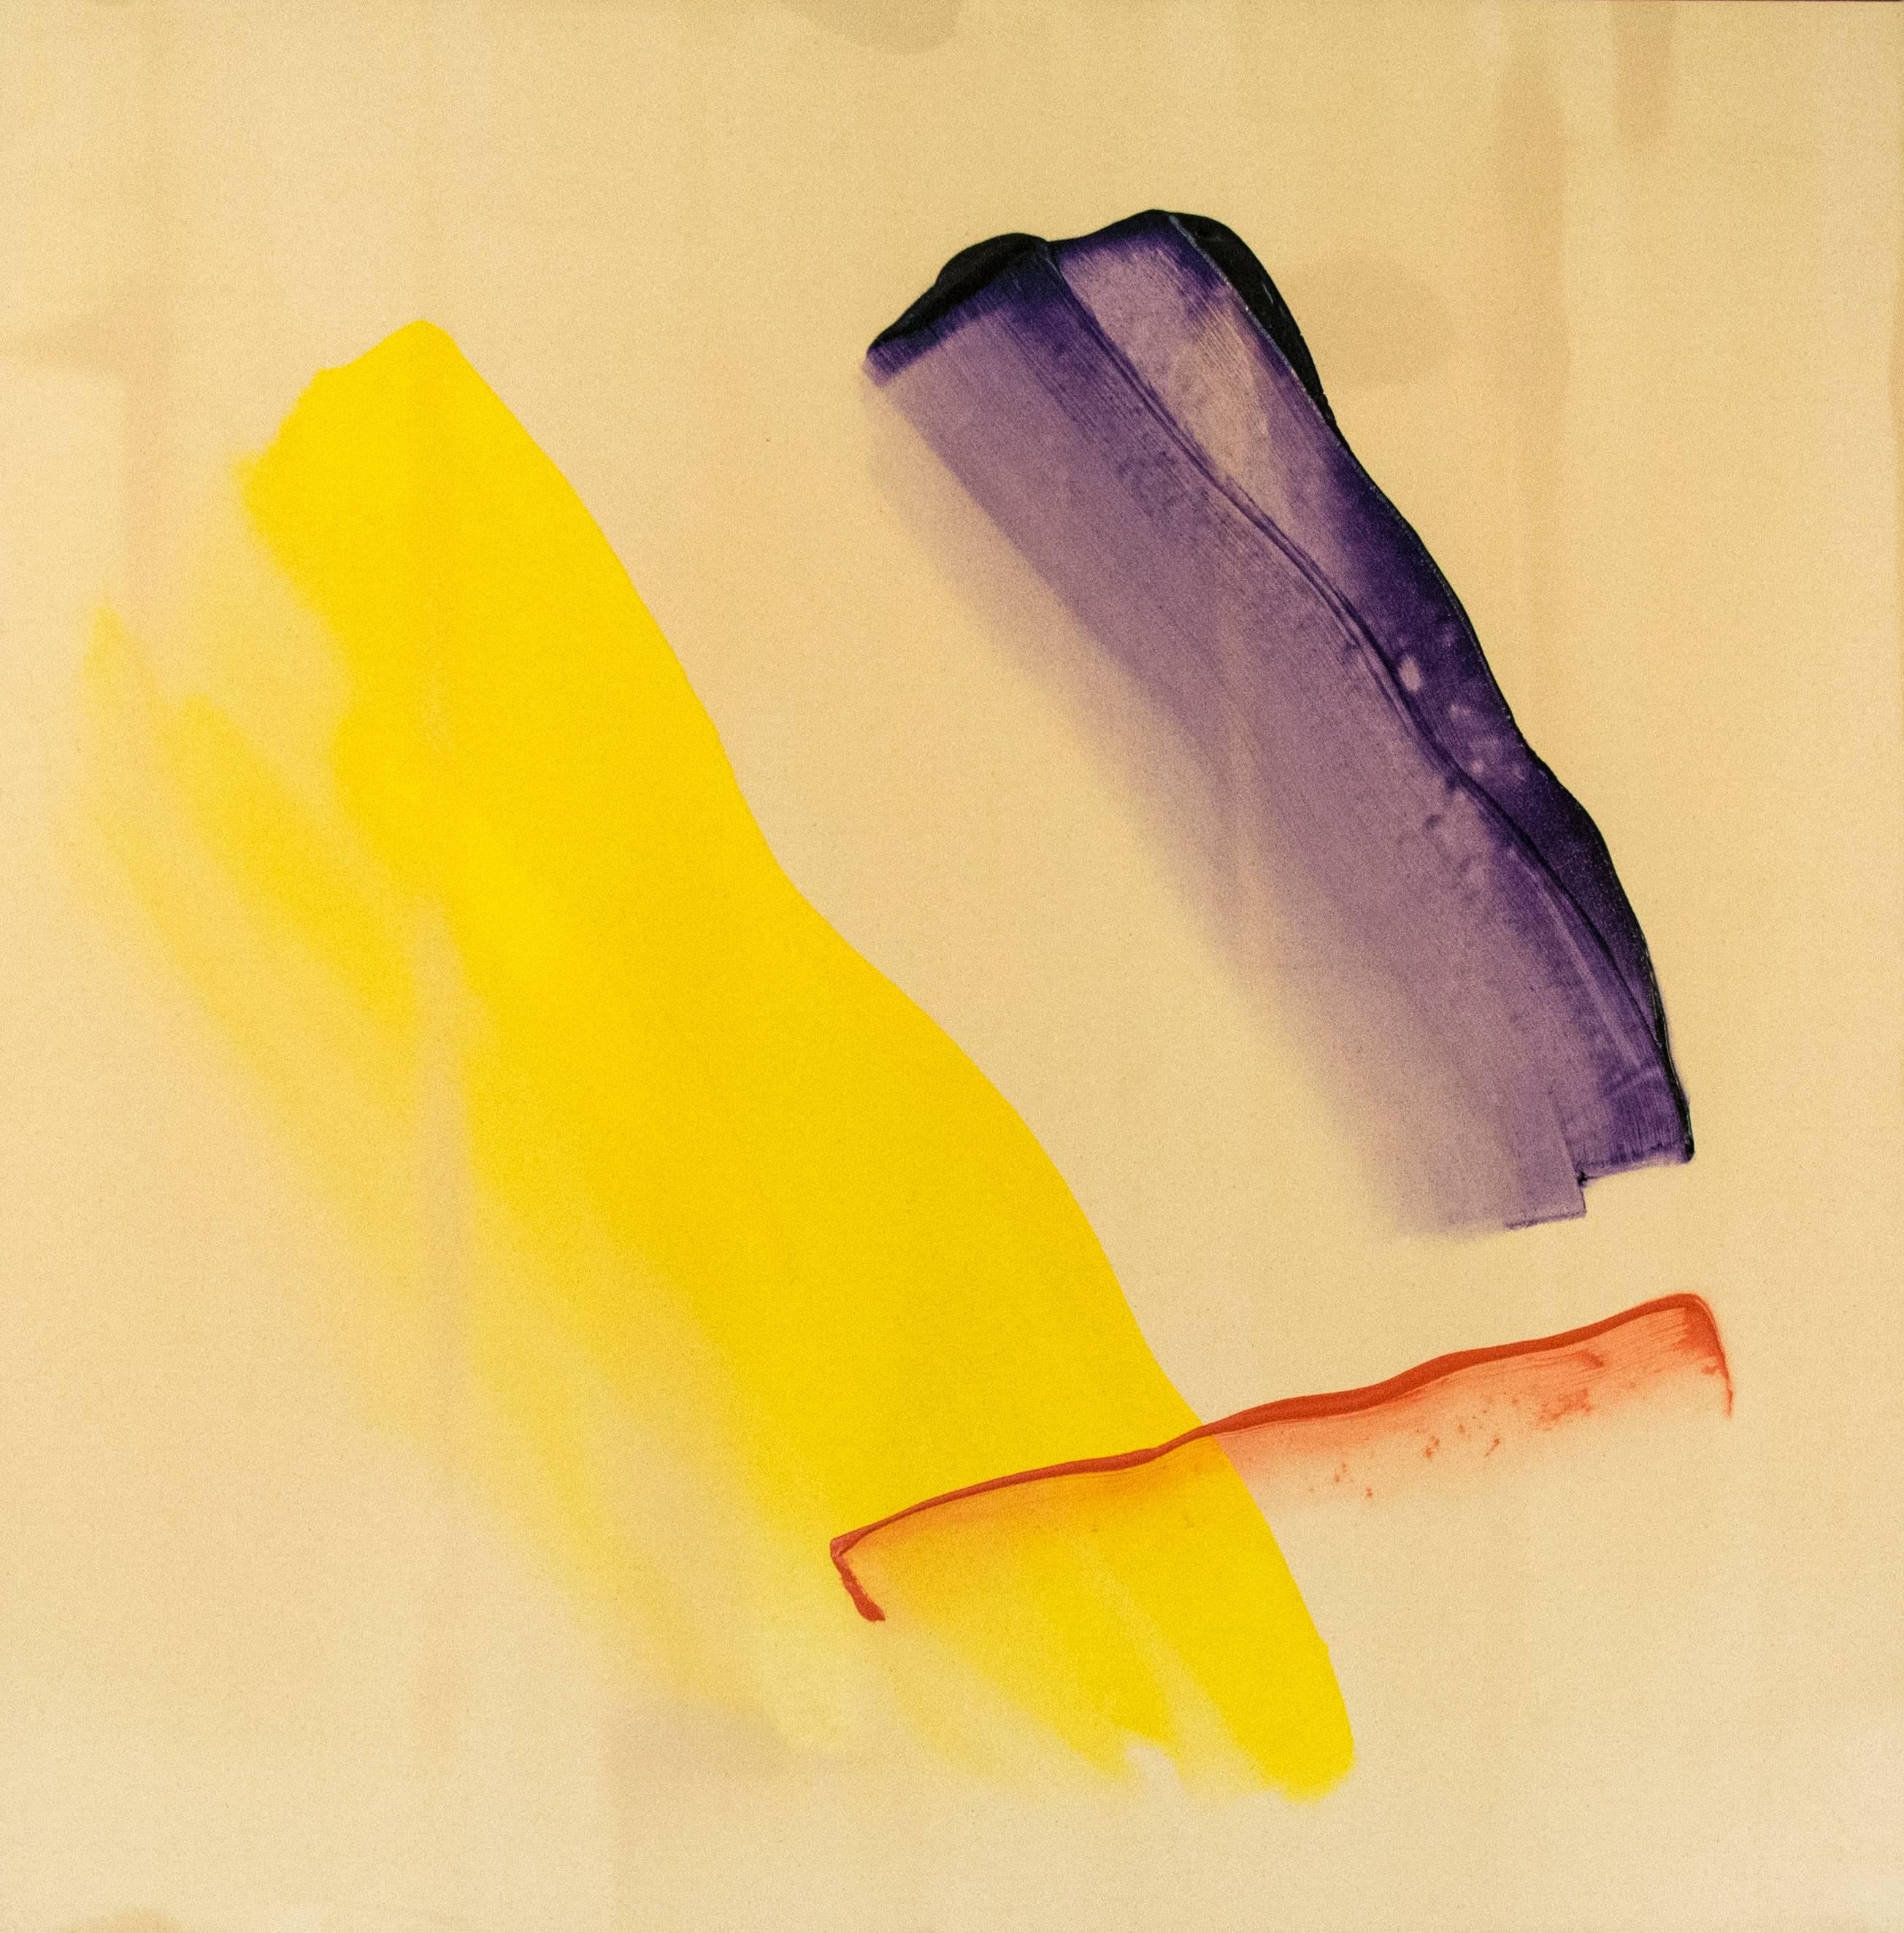 The Colour of Light - large, yellow, purple, gestural abstract acrylic on canvas